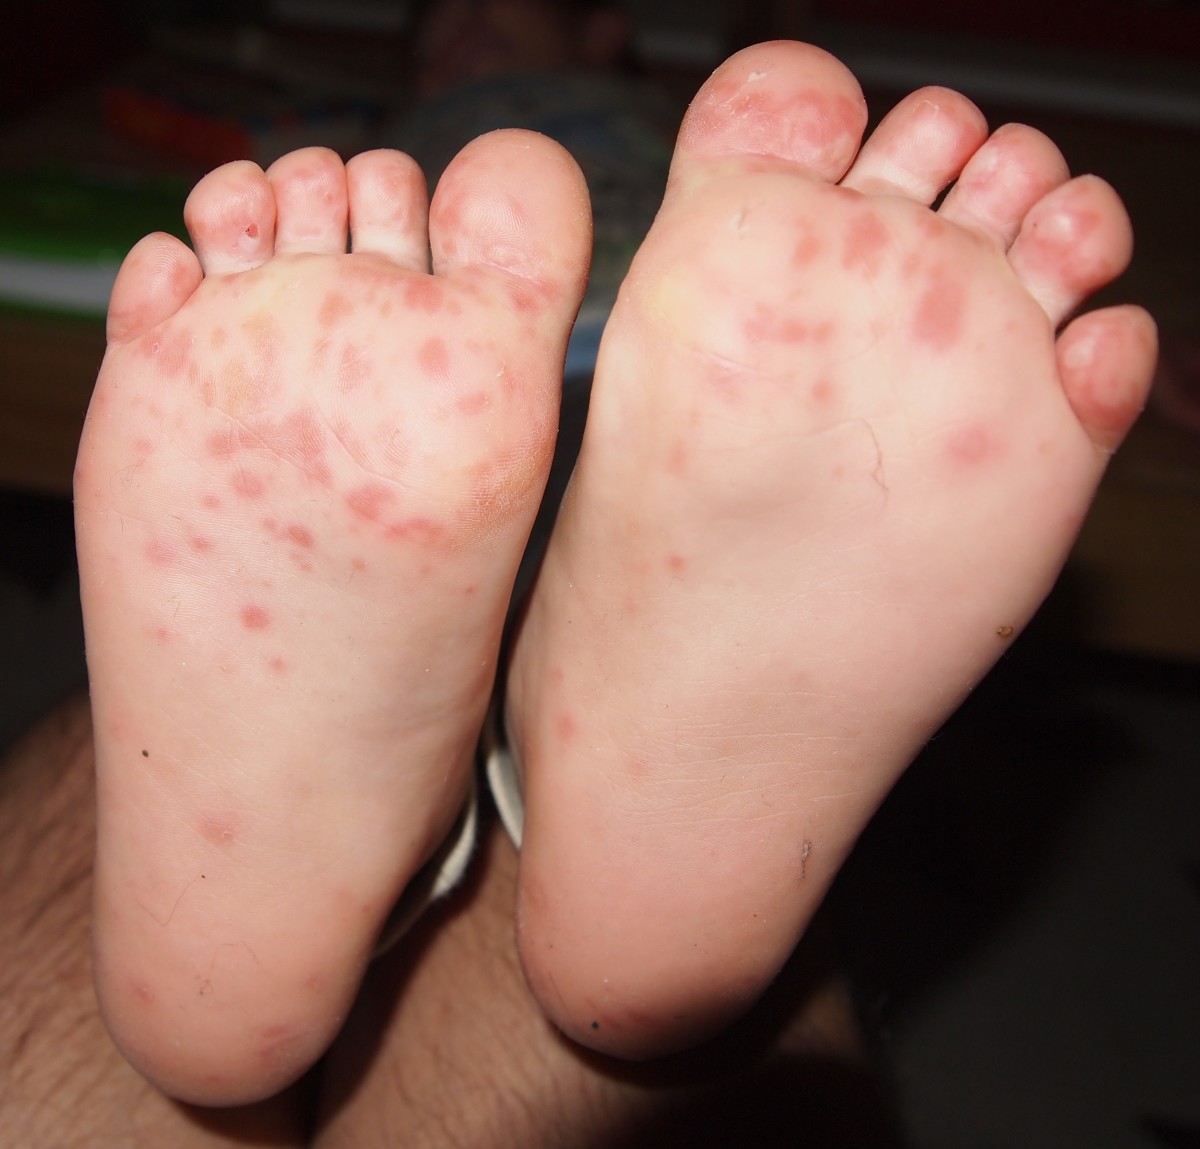 Hand, foot, and mouth disease can cause blisters on the feet, causing some discomfort when walking. 